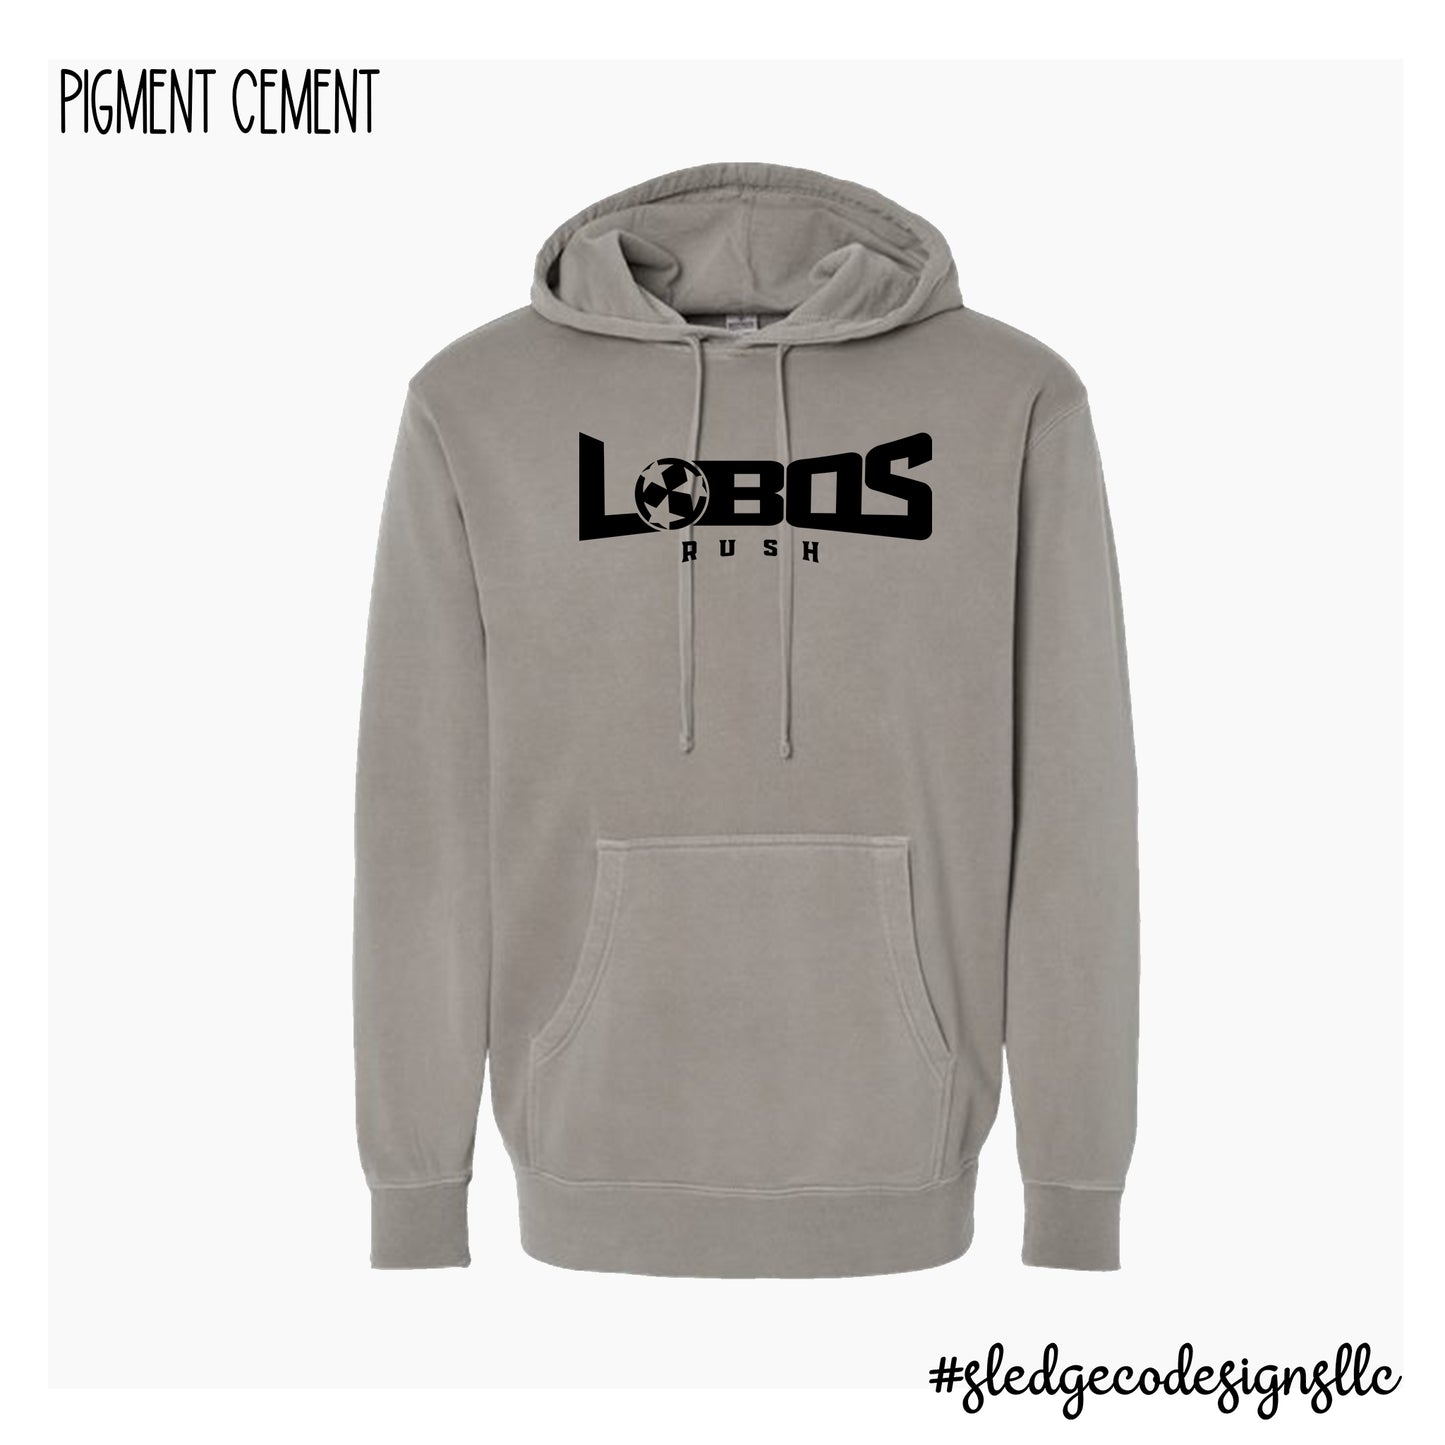 LOBOS SOCCER | Midweight Pigment-Dyed Hooded Sweatshirt | Pigment Cement